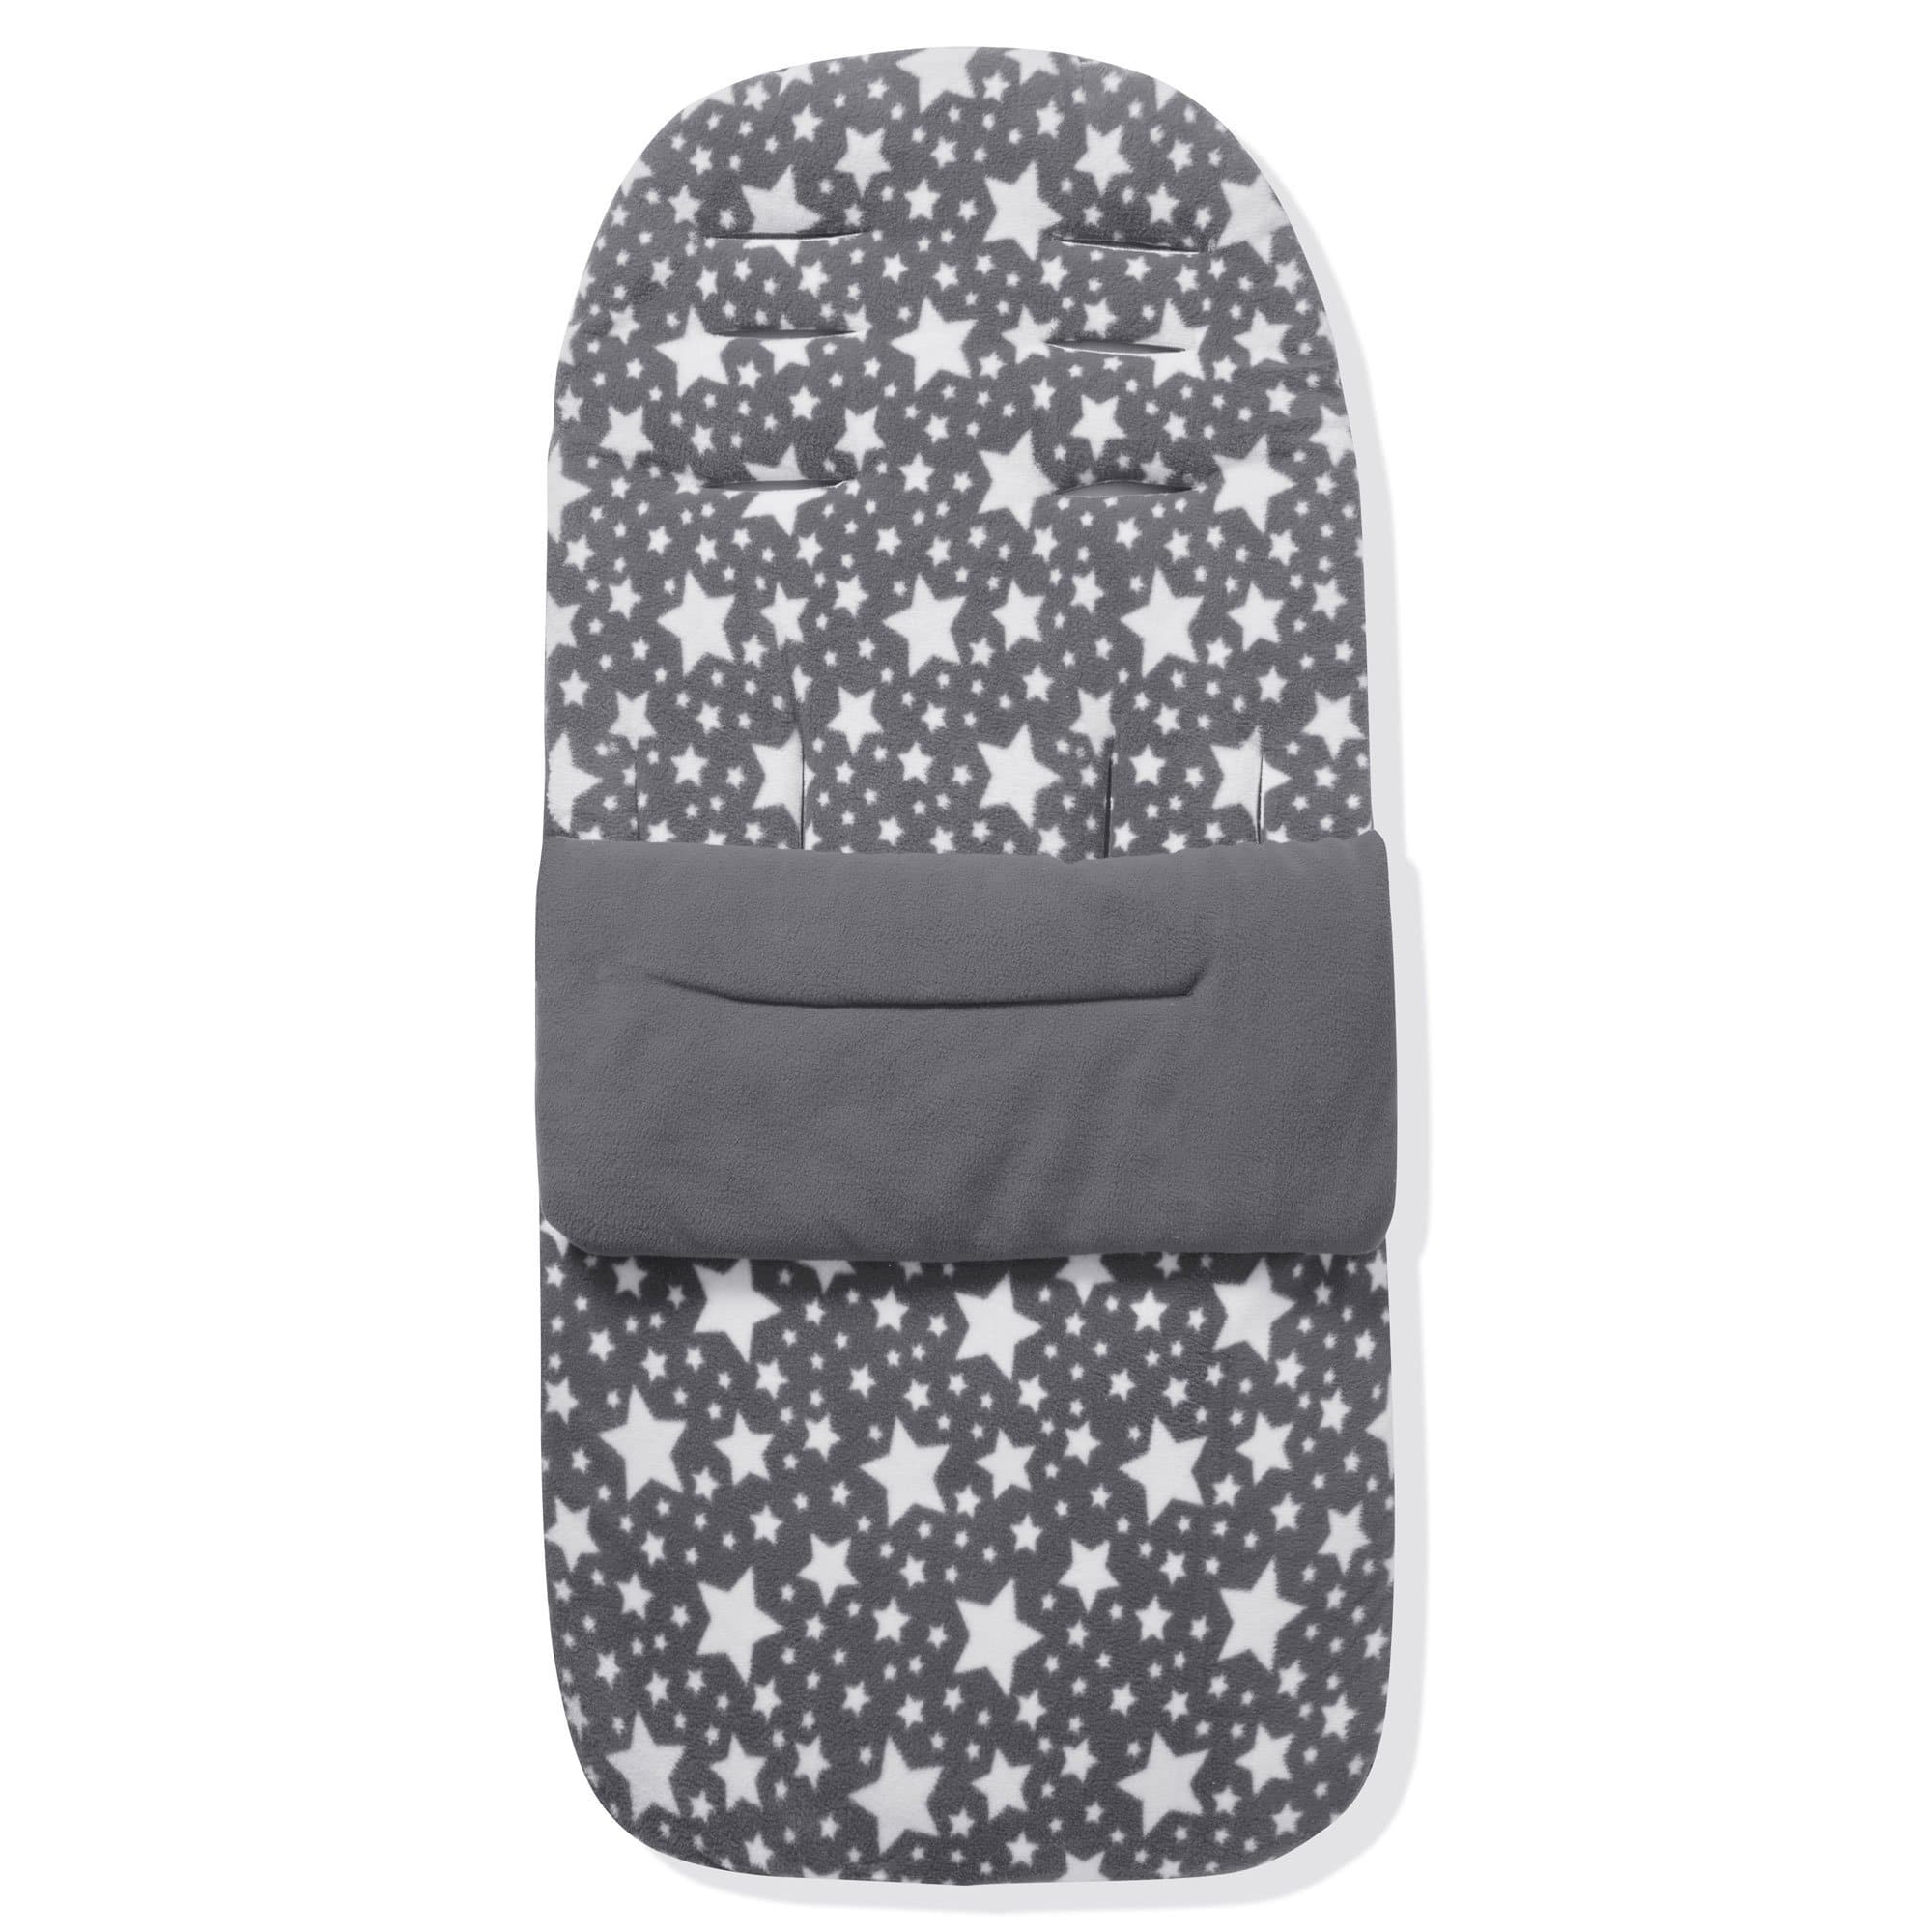 Fleece Footmuff / Cosy Toes Compatible With Bugaboo - Grey Star / Fits All Models | For Your Little One